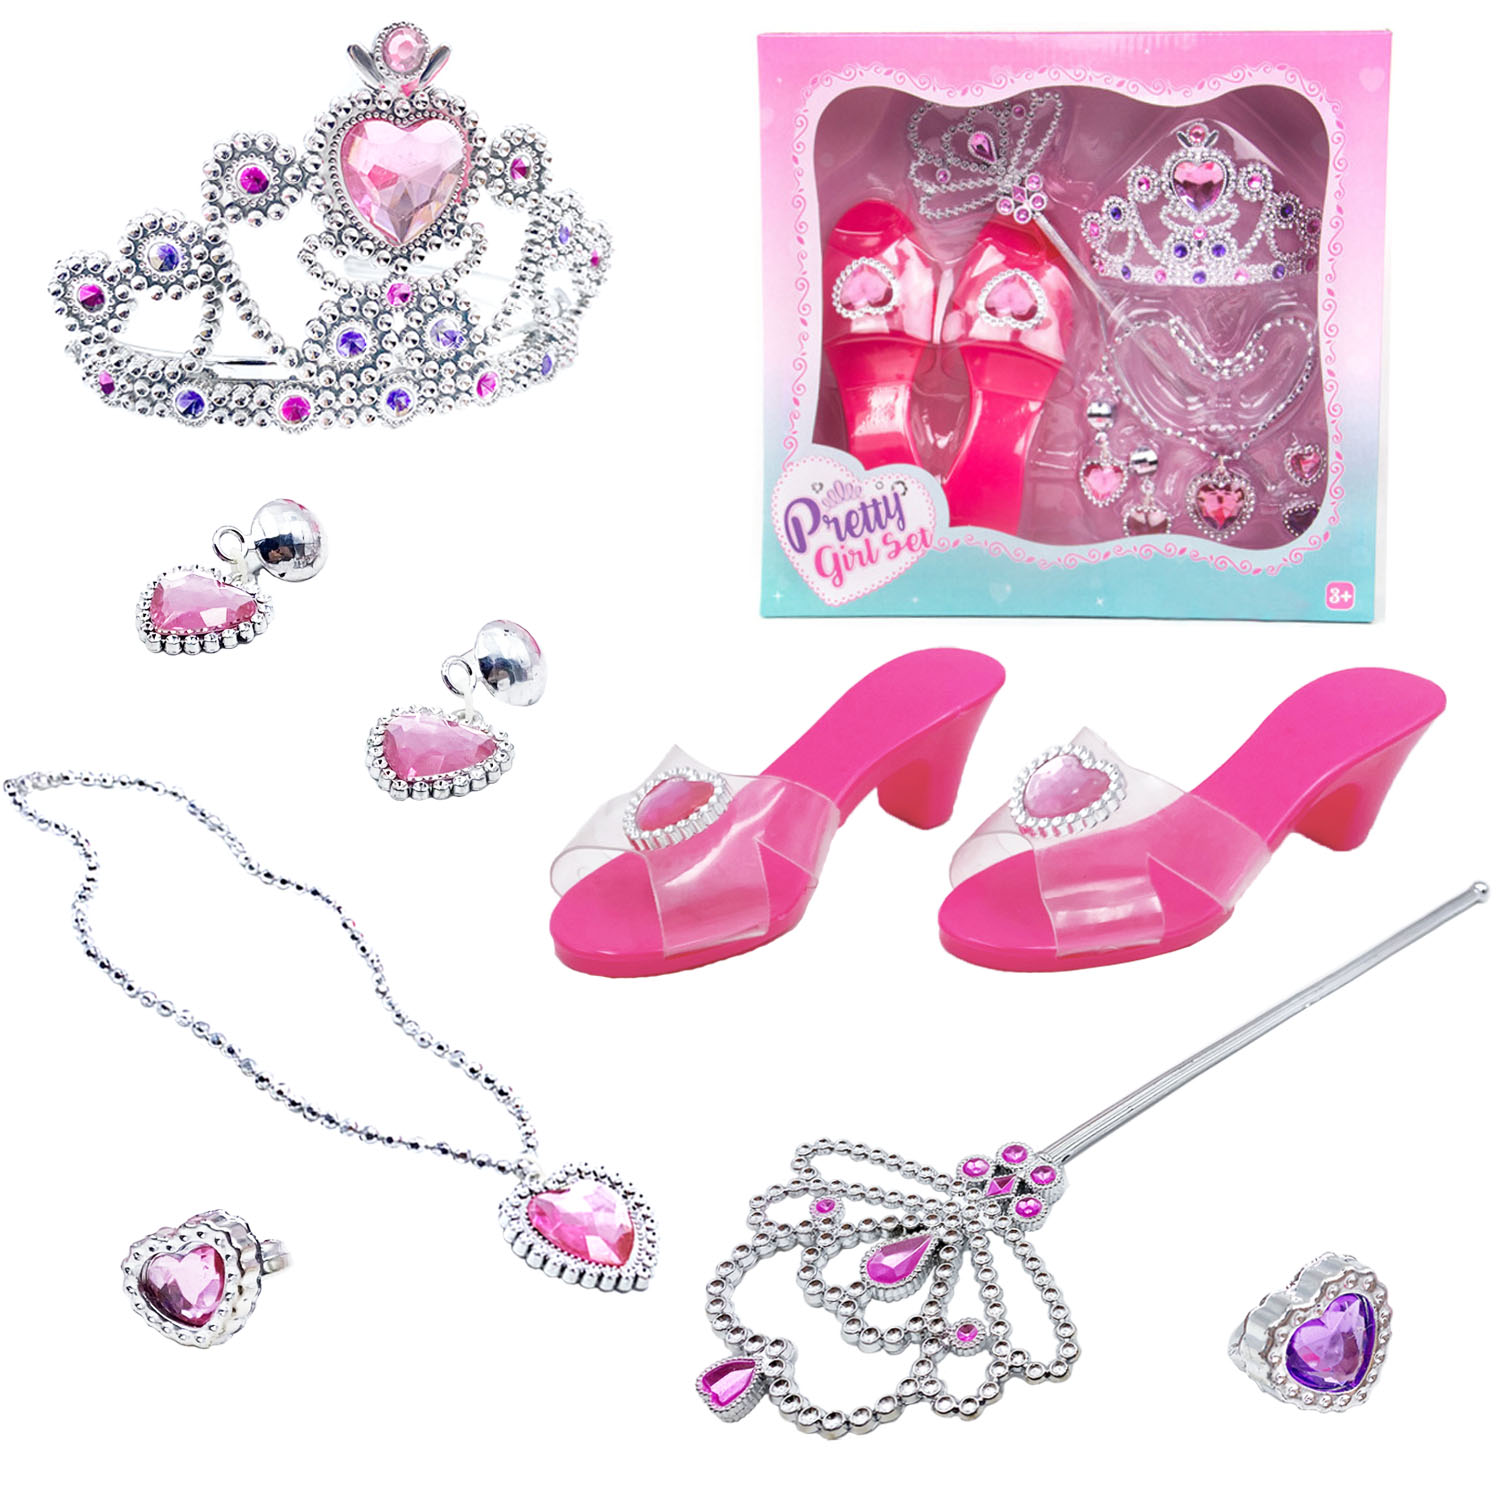 Princess Toys, Princess Dress up Shoes and Jewelry Toys Princess Accessories Play Gift Set for Little Girls 3 4 5 6 Year Old - image 1 of 5